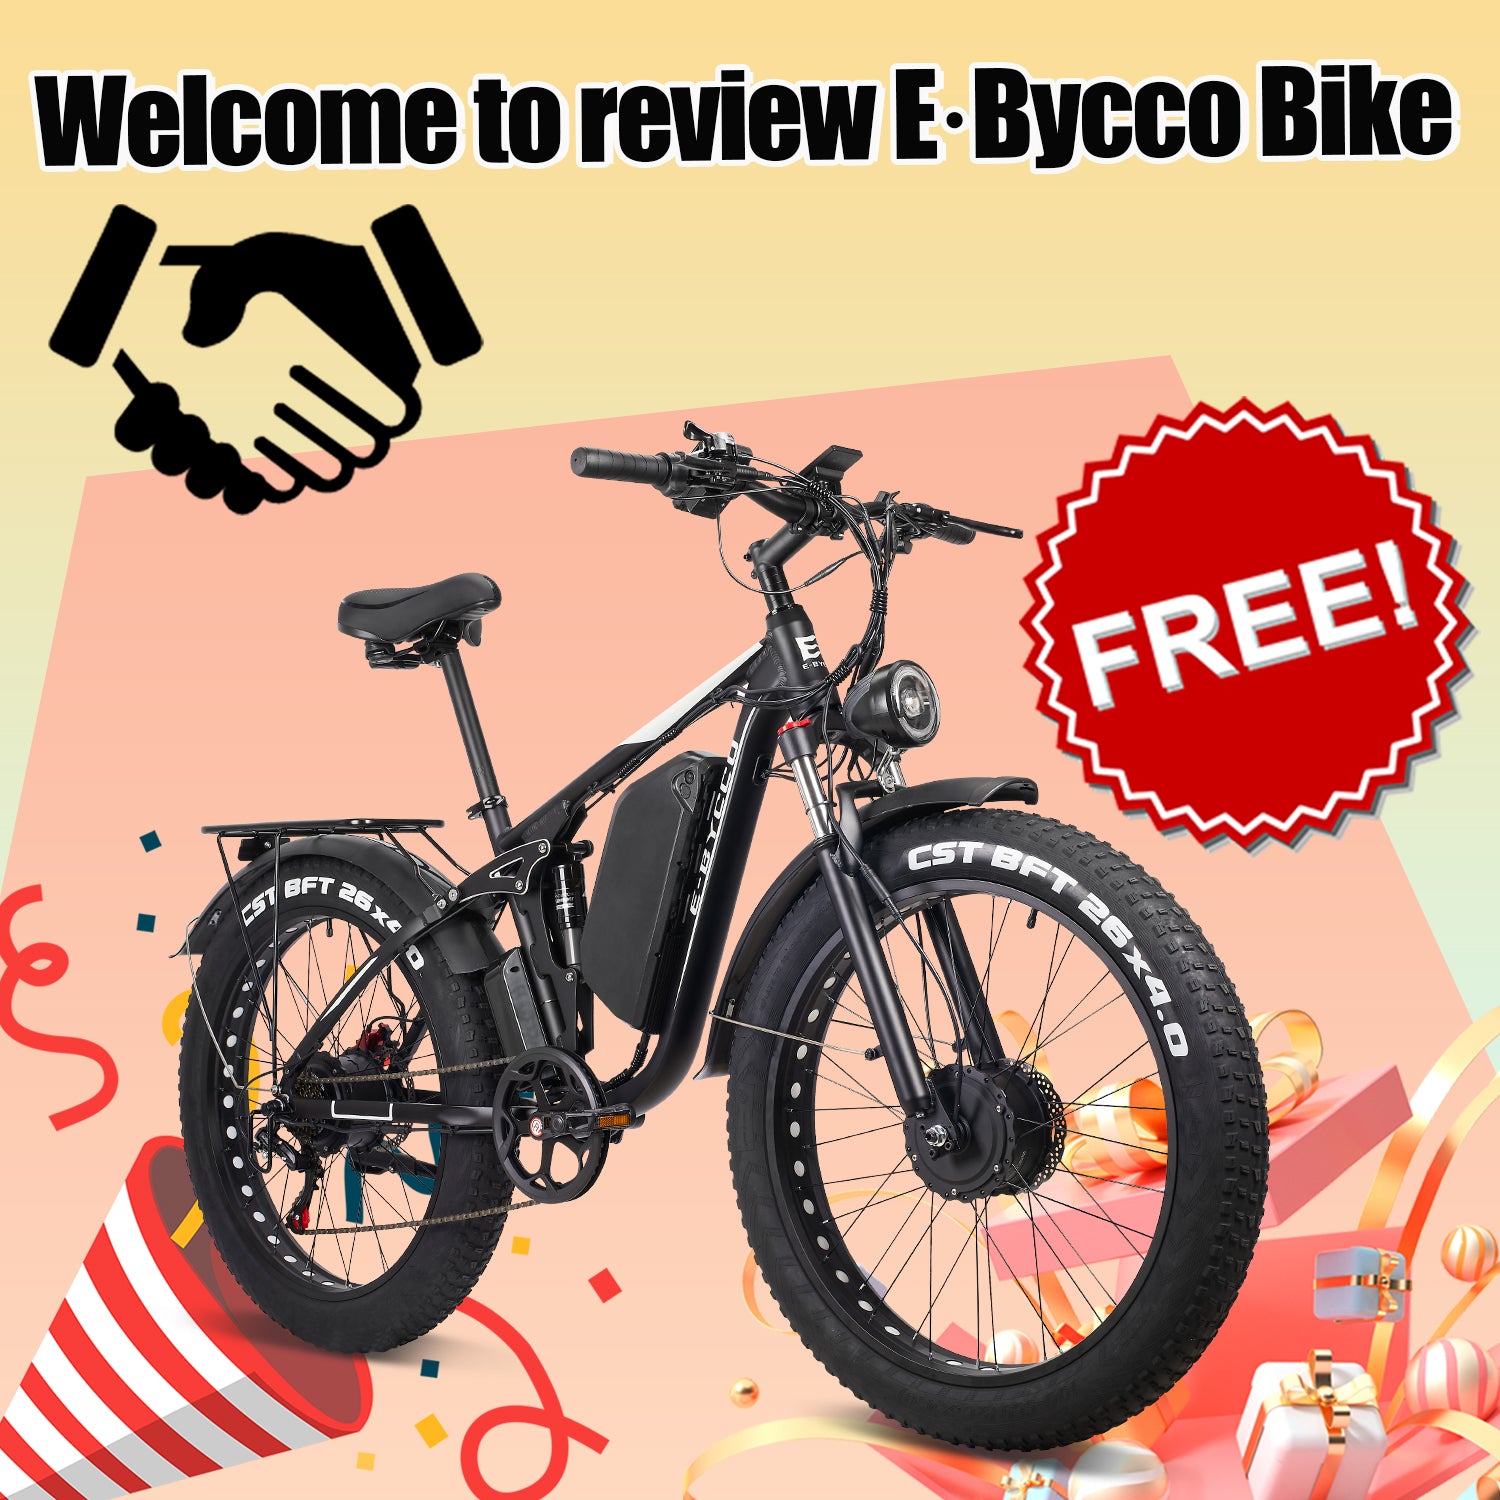 Get a Free Electric Bike from Ebycco: Join Our Influencer Promotion Program